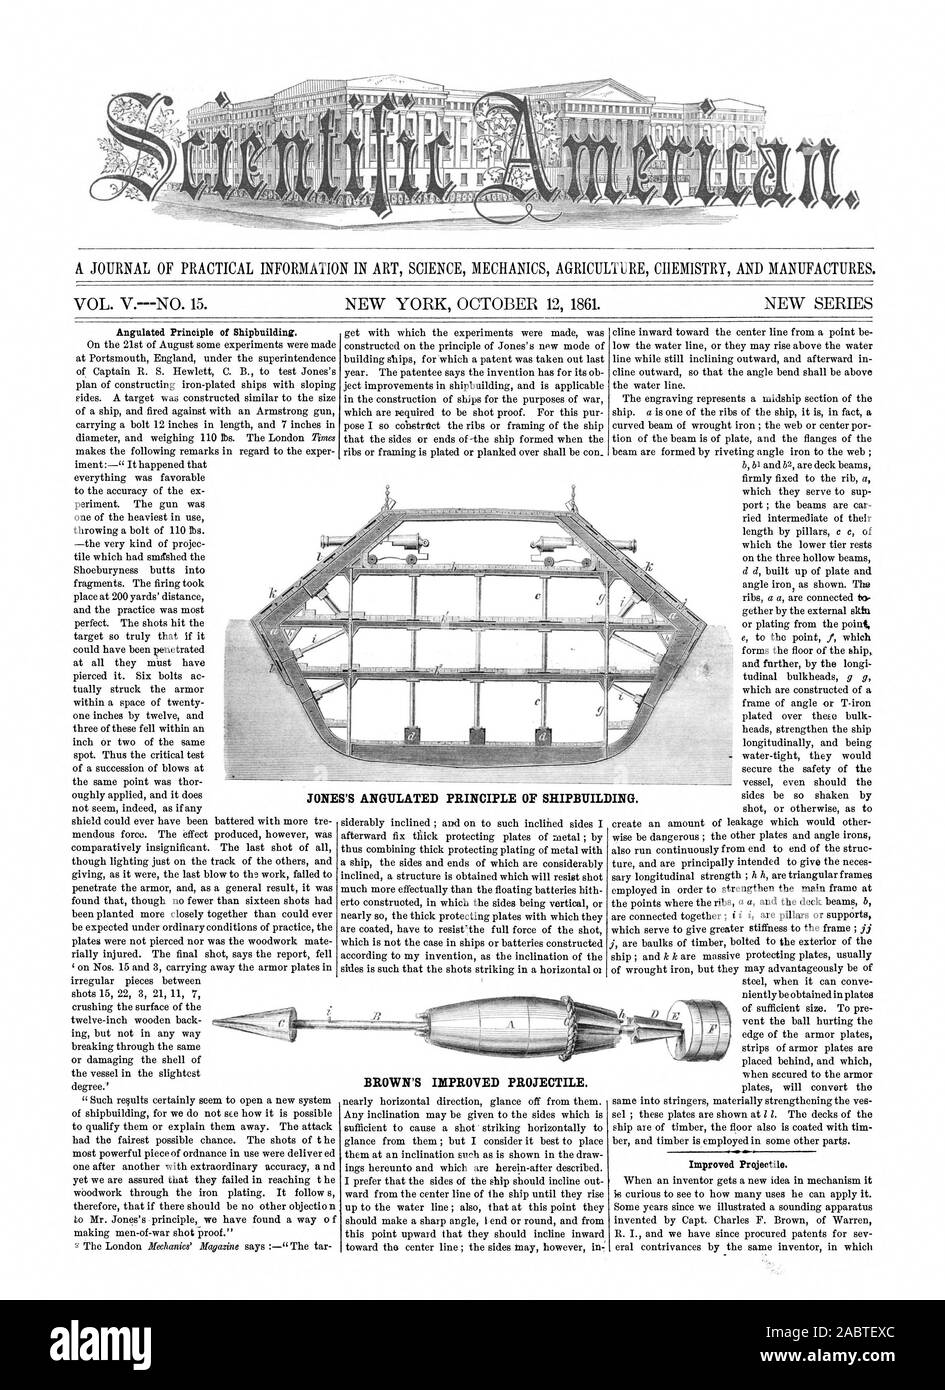 A JOURNAL OF PRACTICAL INFORMATION IN ART SCIENCE MECHANICS AGRICULTURE CHEMISTRY AND MANUFACTURES. Angulated Principle of Shipbuilding. BROWN'S IMPROVED PROJECTILE. Improved Projectile. JONE S'S ANGULATED PRINCIPLE OF SHIPBUILDING., scientific american, 1861-10-12 Stock Photo